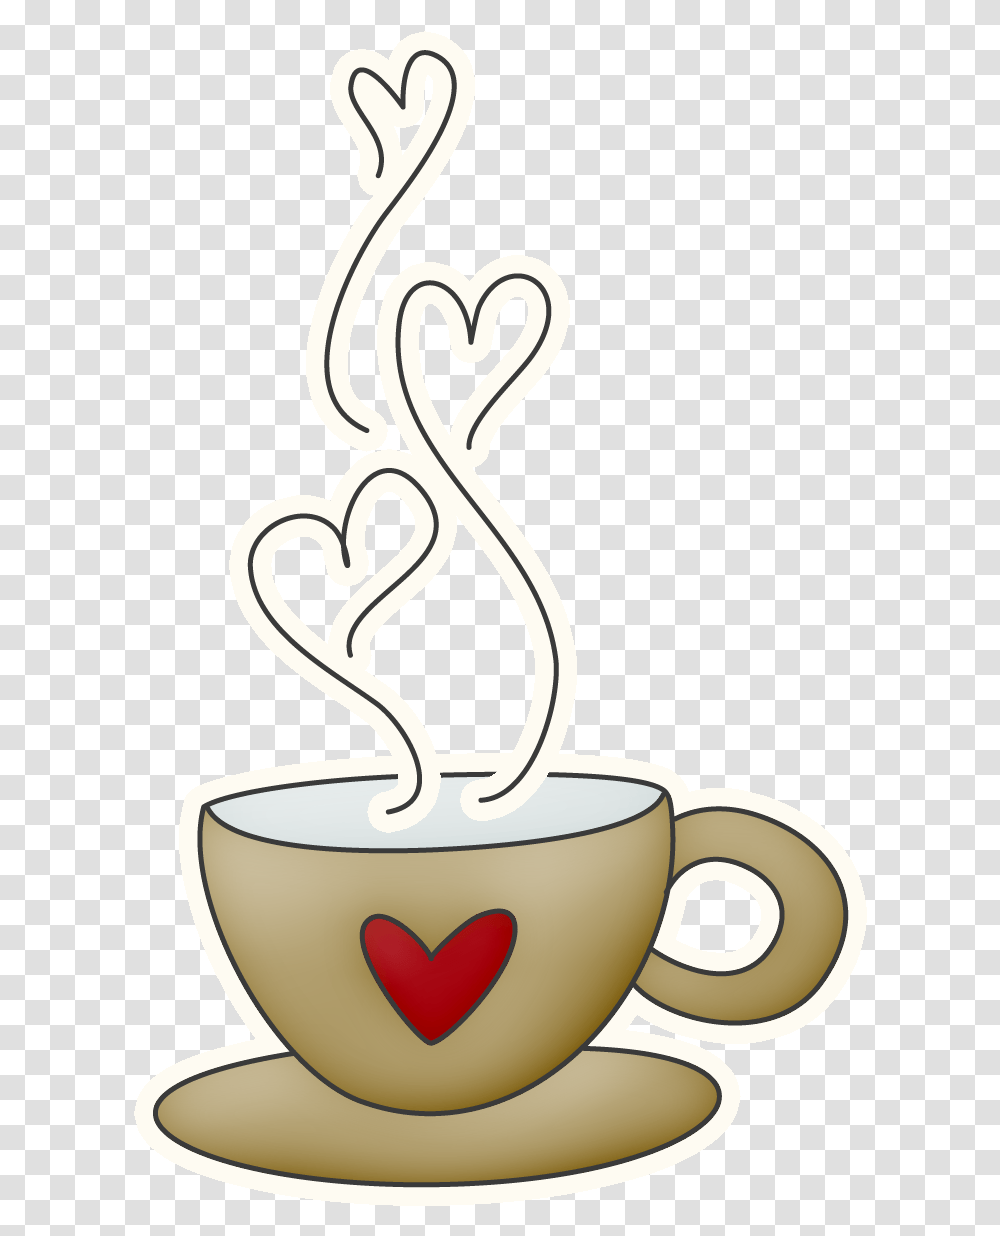 Library Of Coffee Mug With Heart Svg Xicara Desenho, Coffee Cup, Espresso, Beverage, Drink Transparent Png